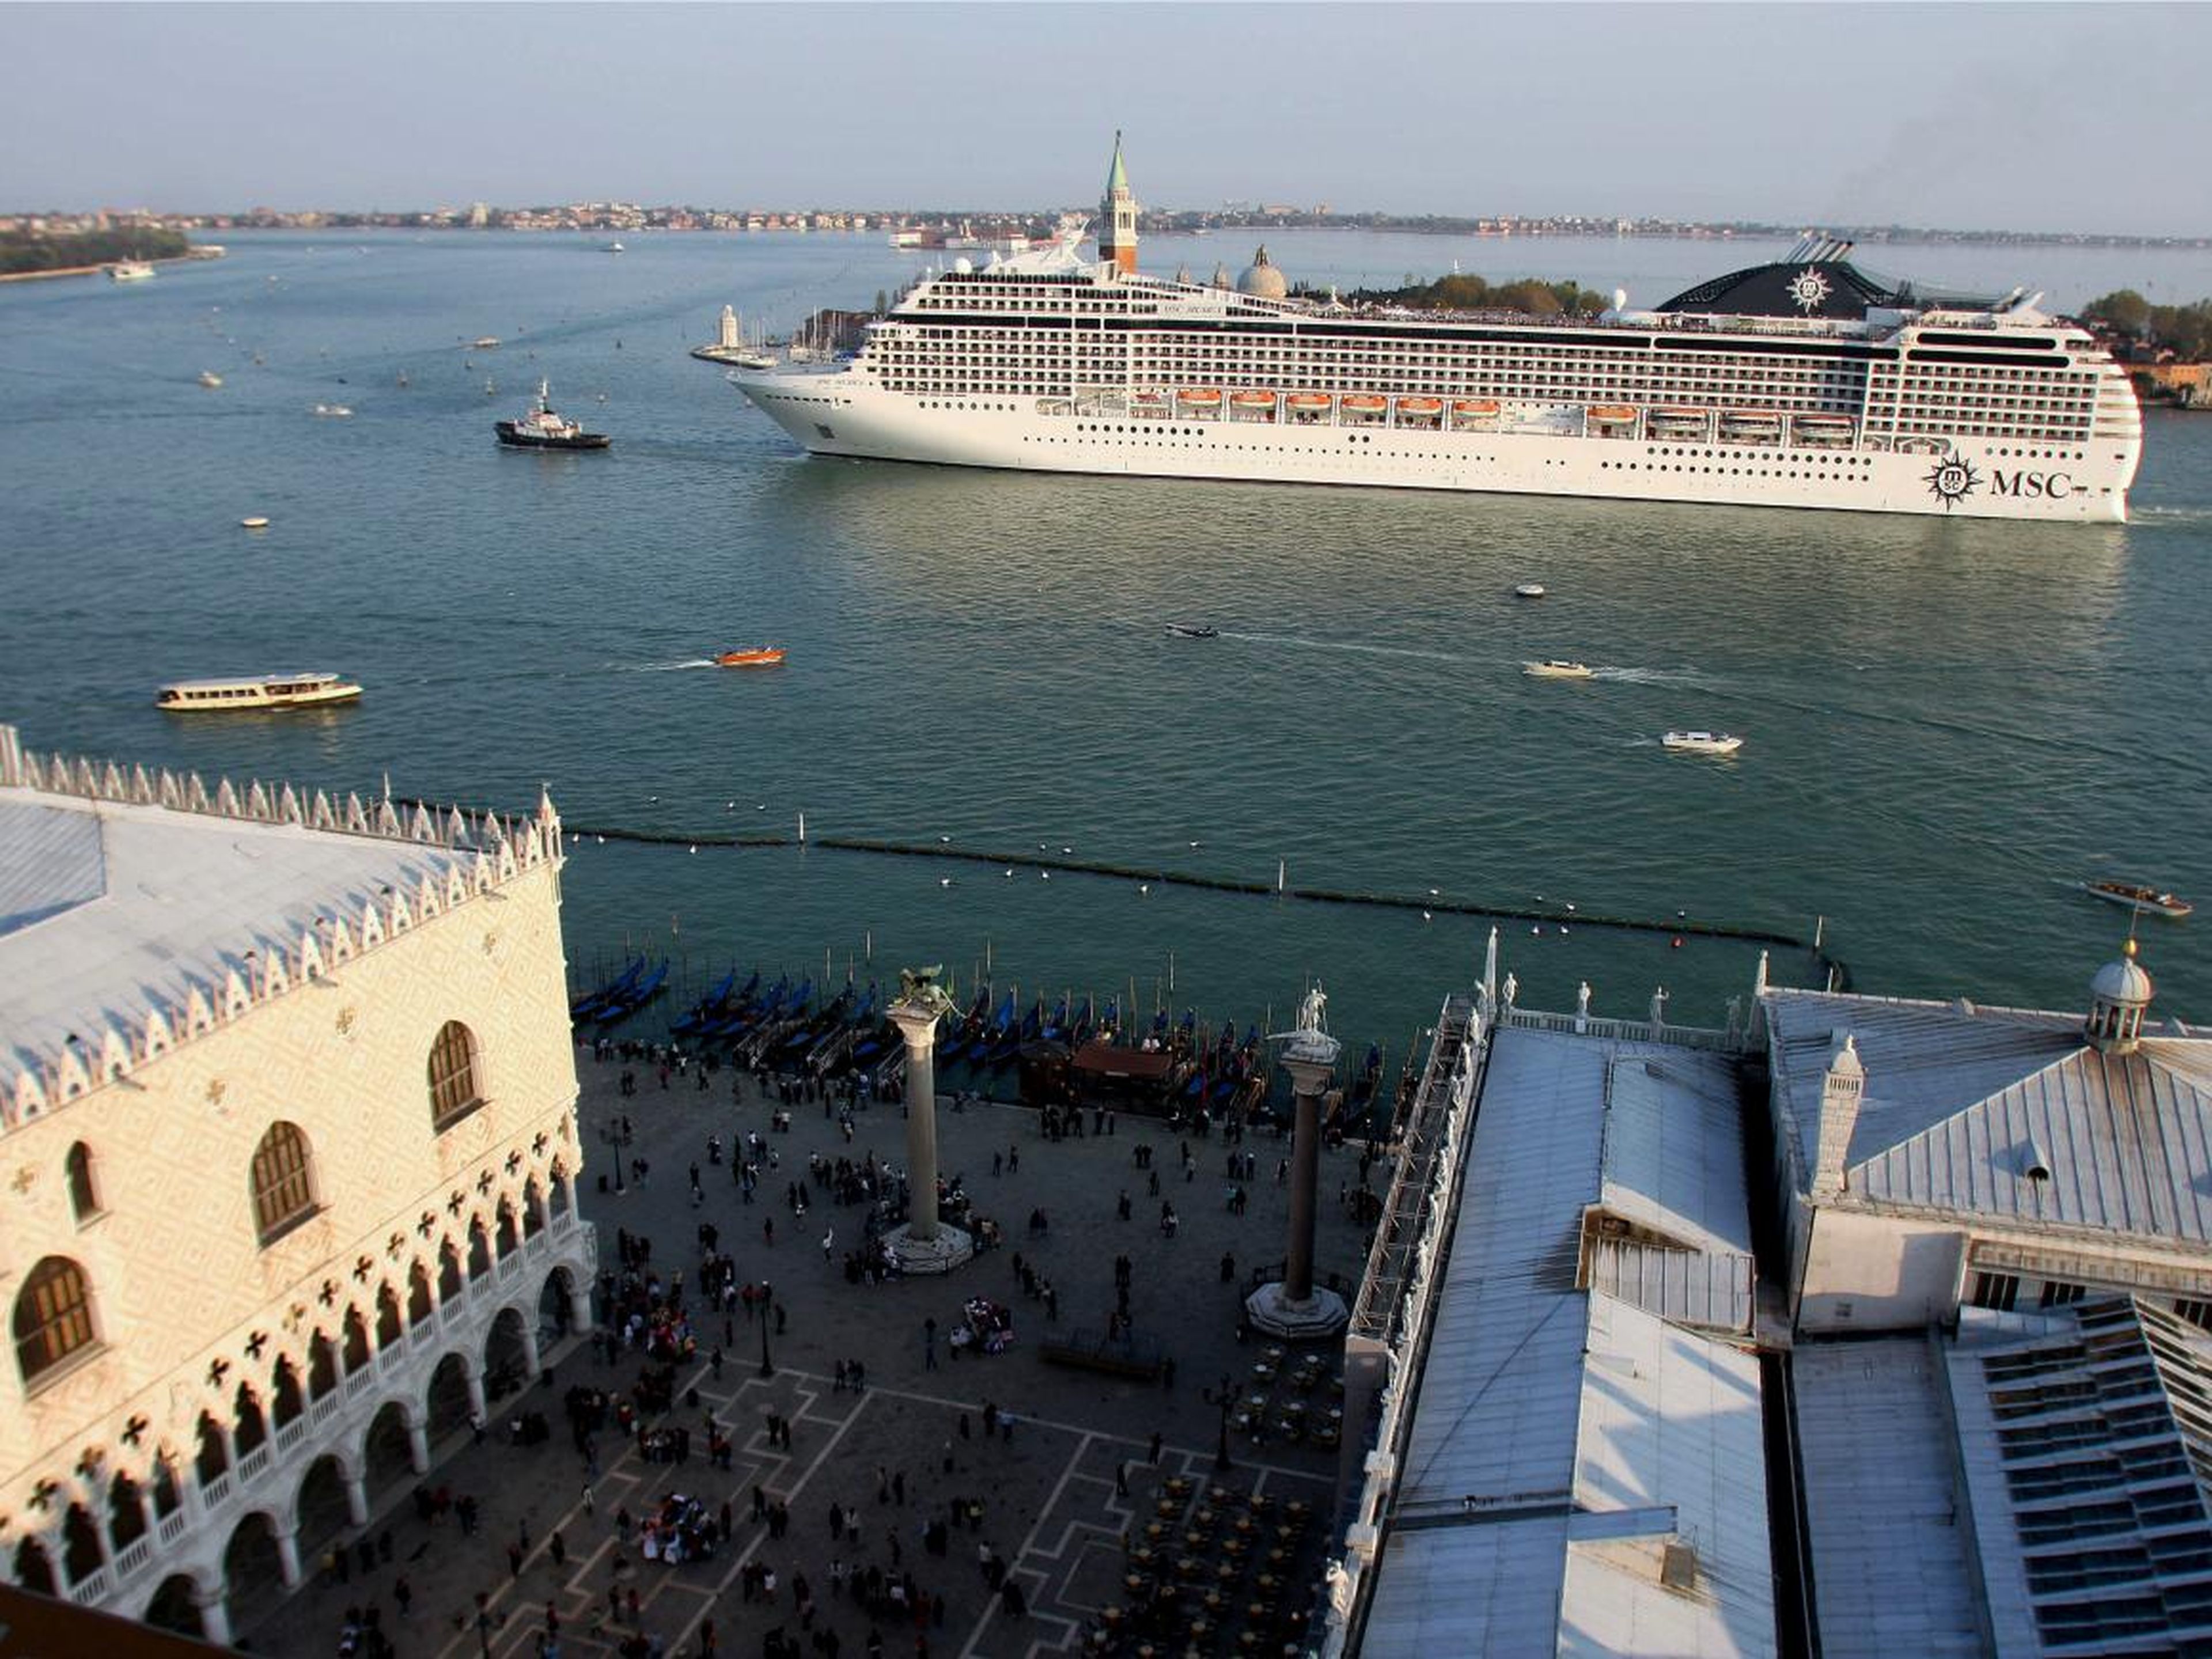 Critics say that even cruise ships passing nearby will damage the fragile ecosystem of the Venice lagoon.